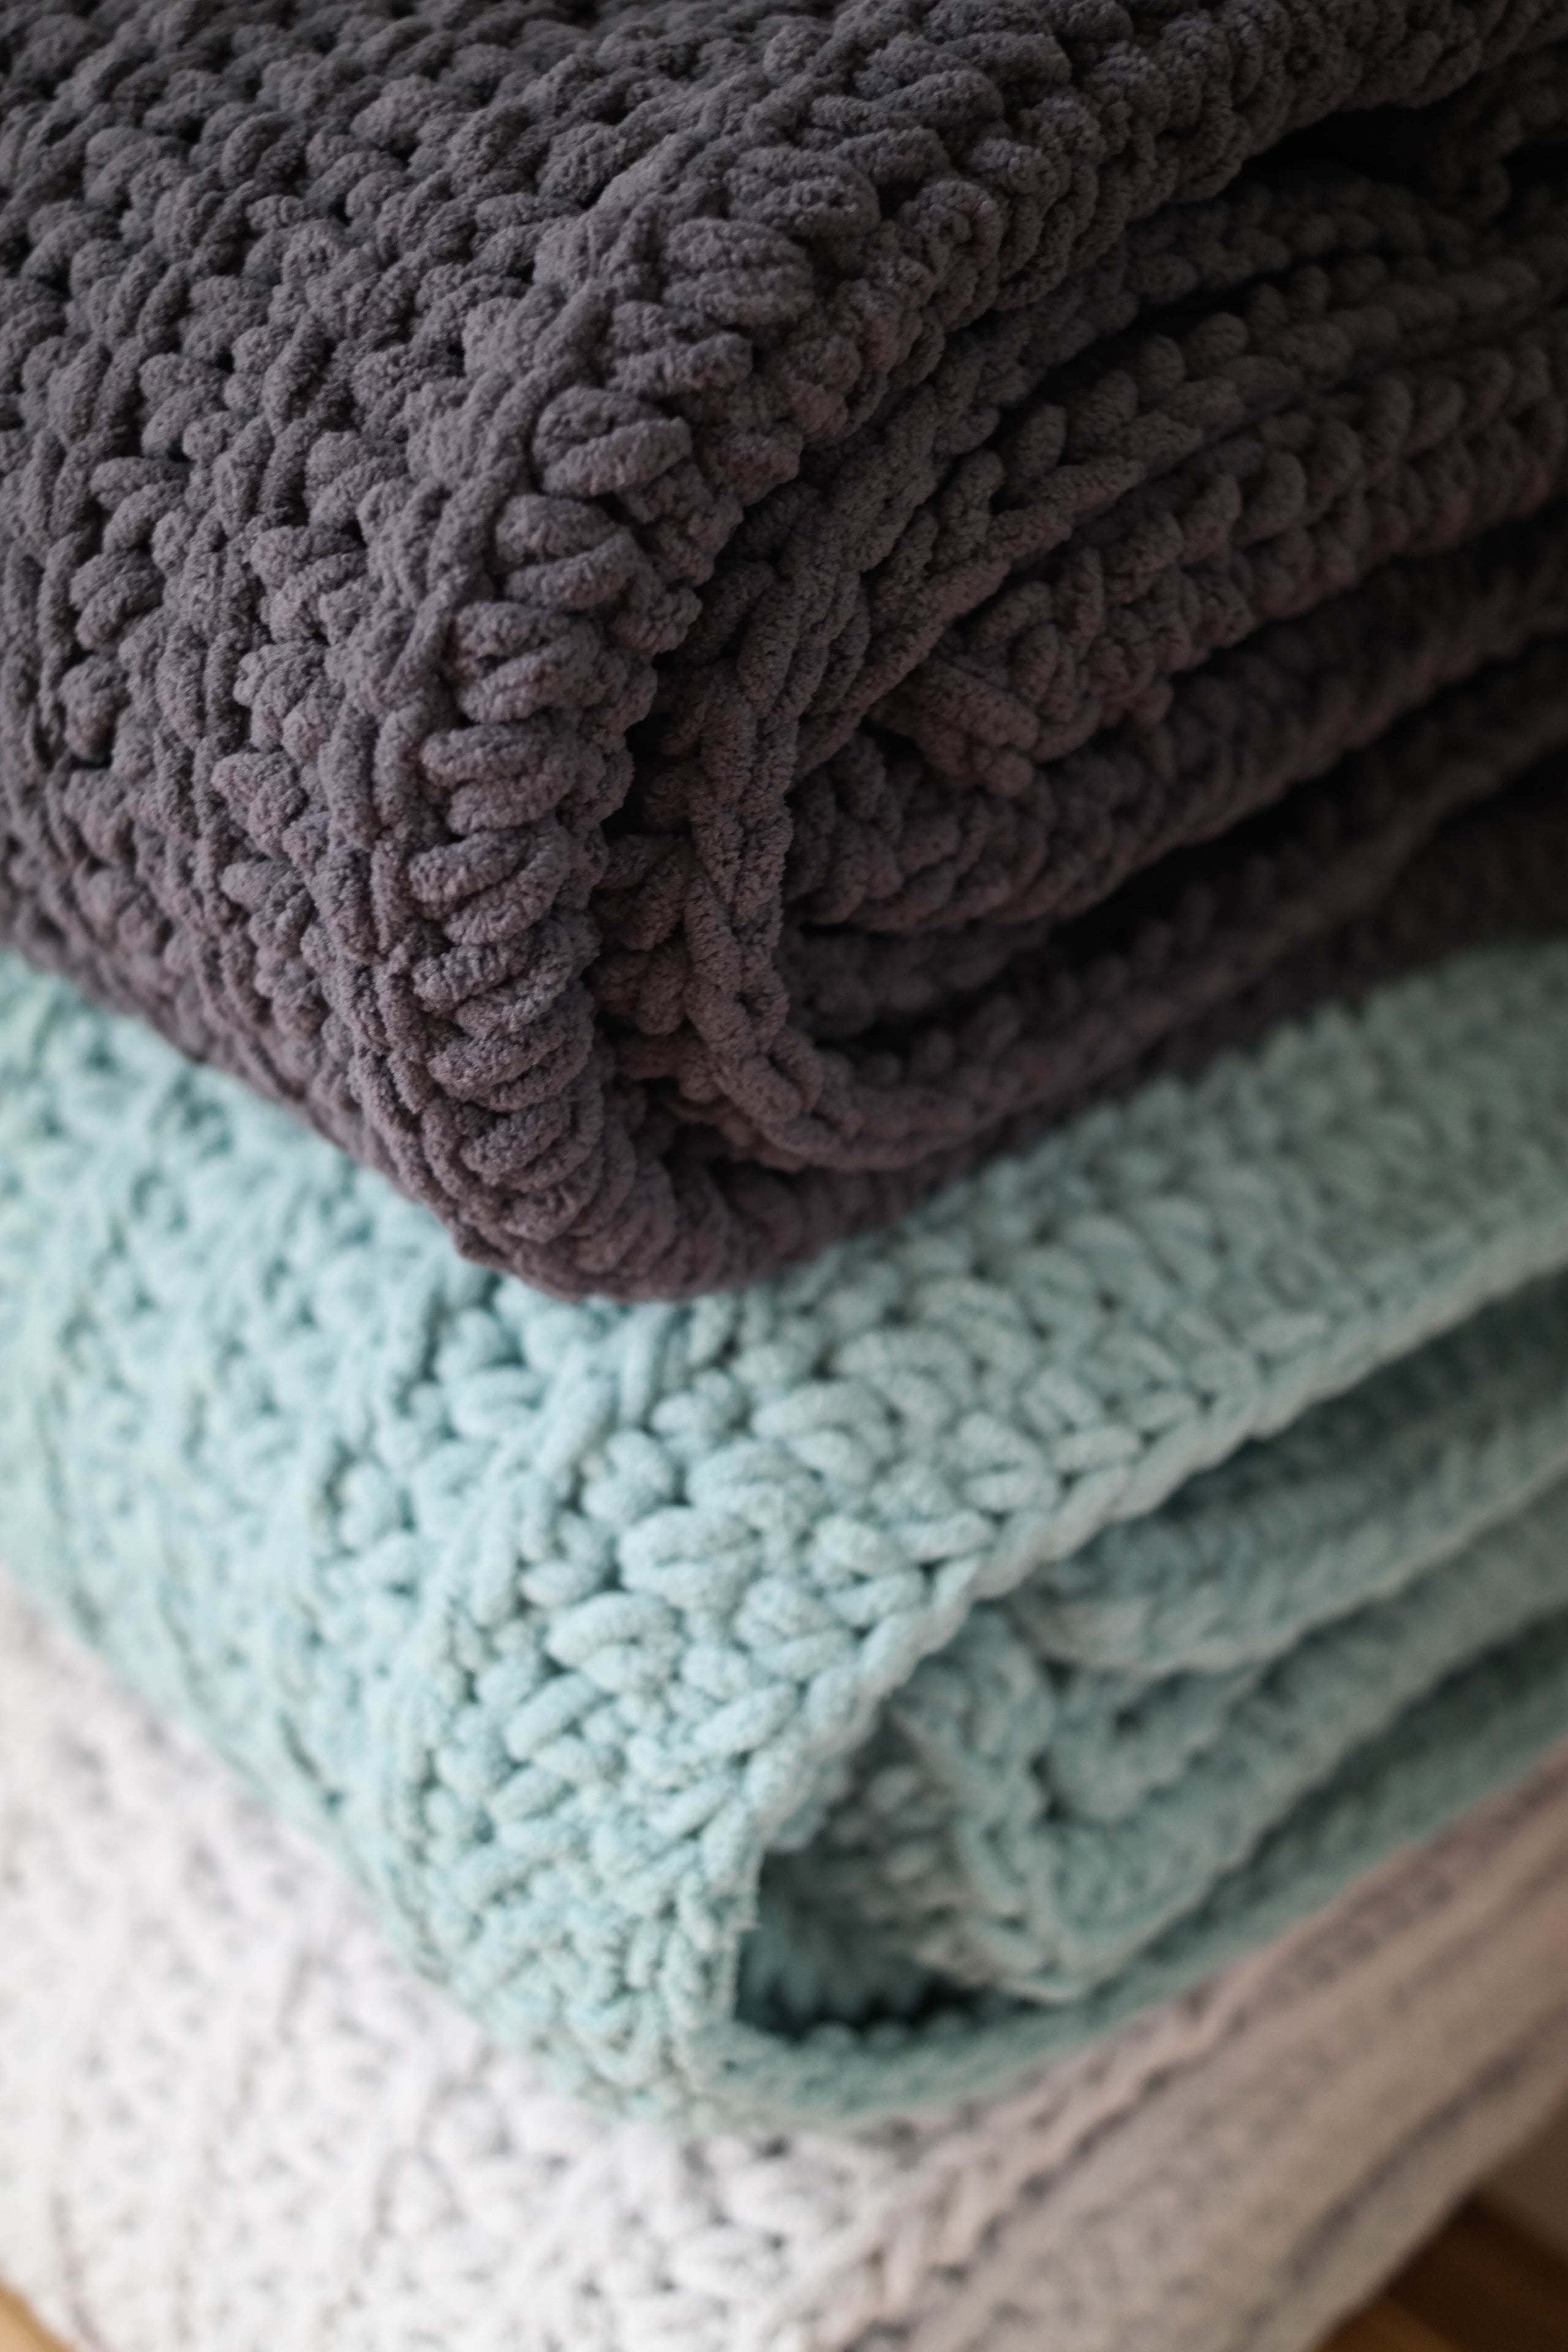 Aesthetic Nest: Sewing: Heirloom Cut Chenille Baby Blanket